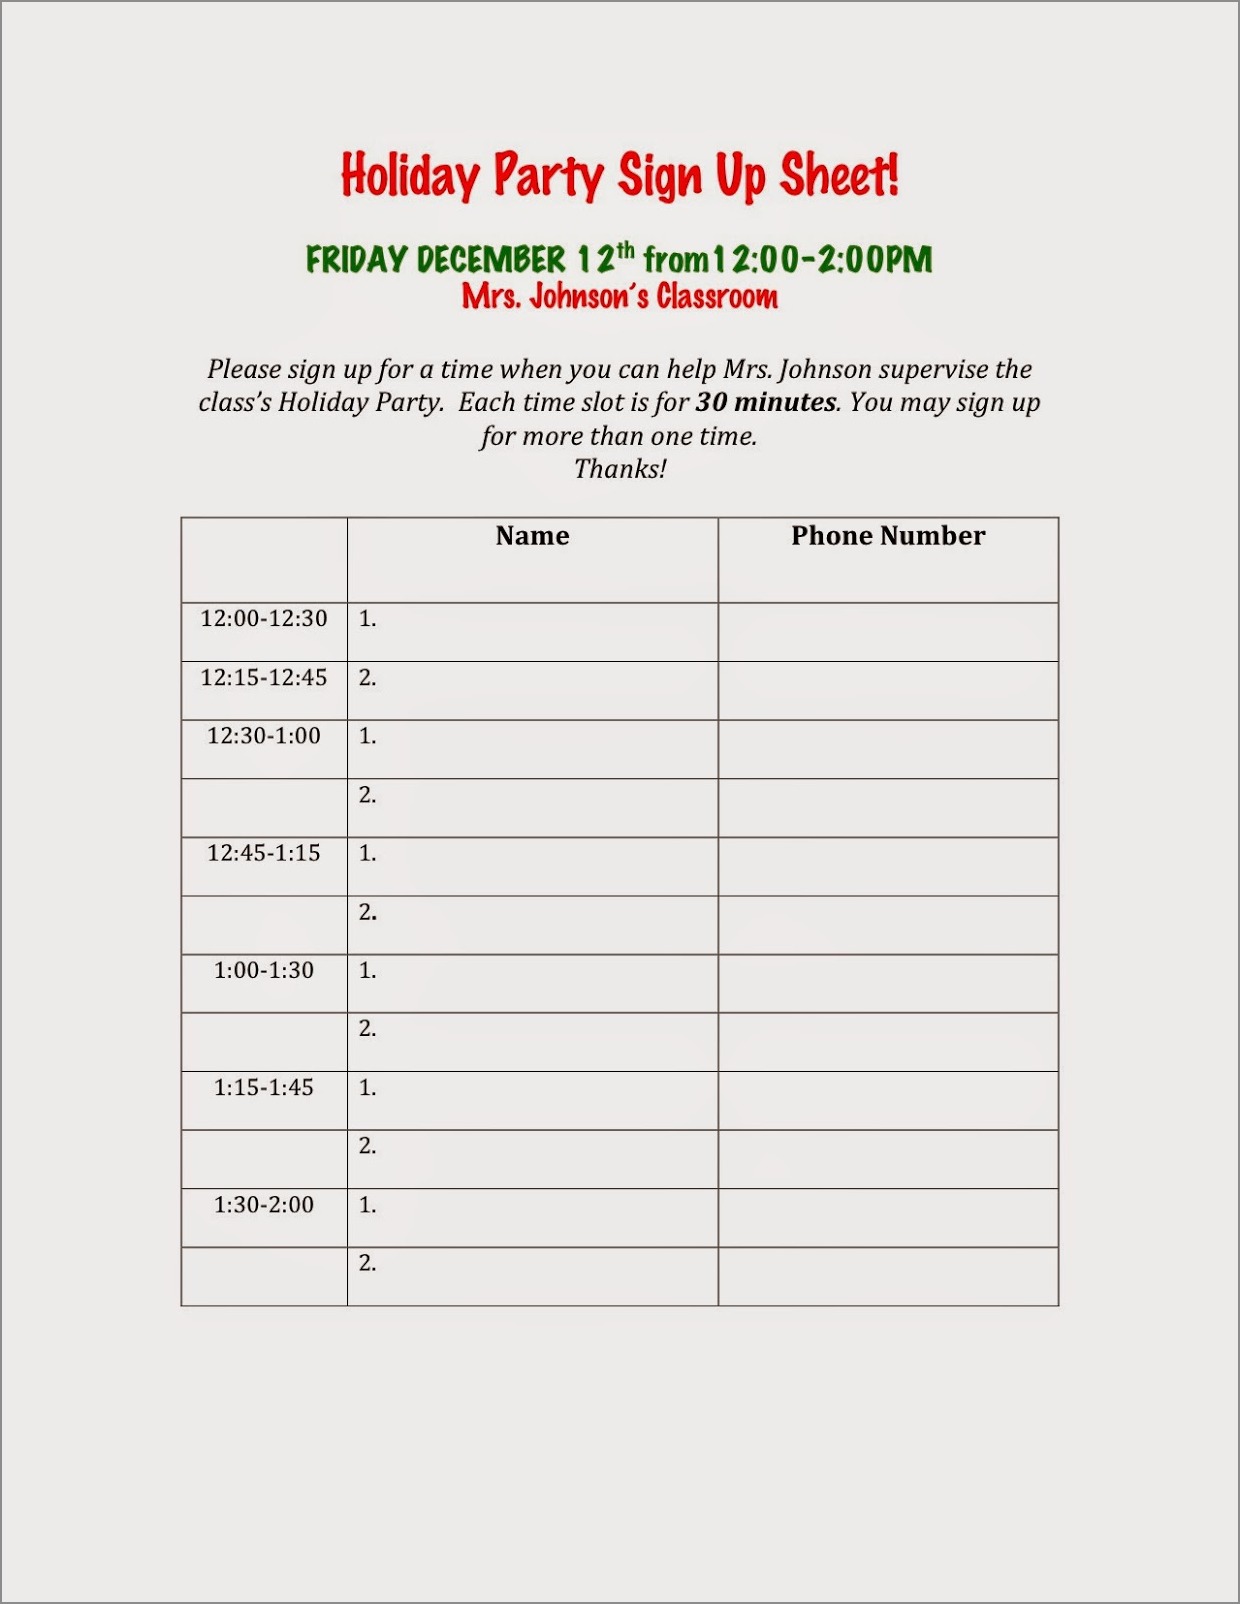 Christmas party sign up sheet template example